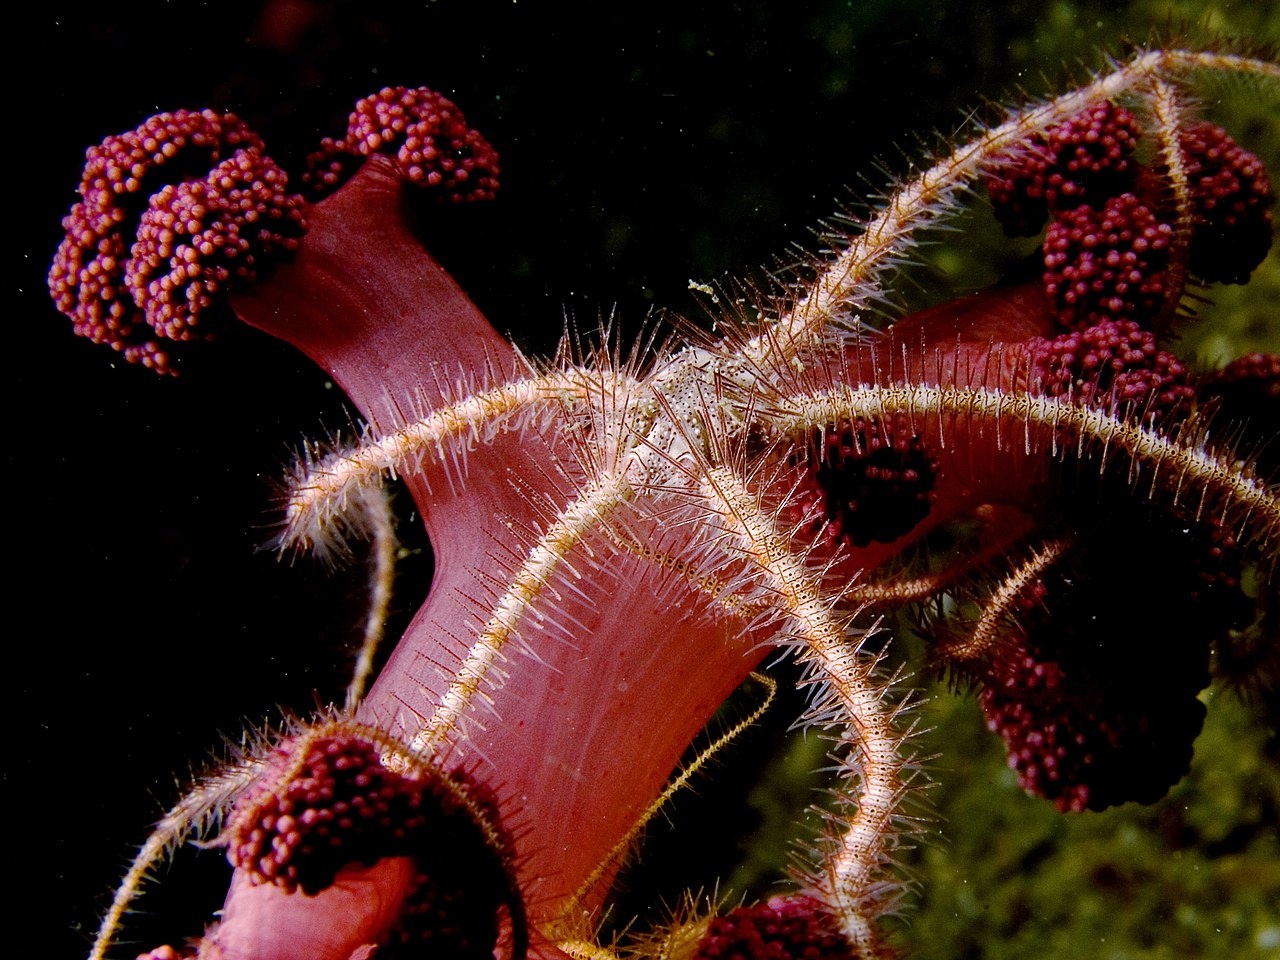 Ophiothrix foveolata - Ophiothrix foveolata - <a href='https://commons.wikimedia.org/wiki/File:Ophiothrix_foveolata_(Brittle_star).jpg' title='via Wikimedia Commons'>Nhobgood Nick Hobgood</a> / <a href='https://creativecommons.org/licenses/by-sa/3.0'>CC BY-SA</a> - BioObs